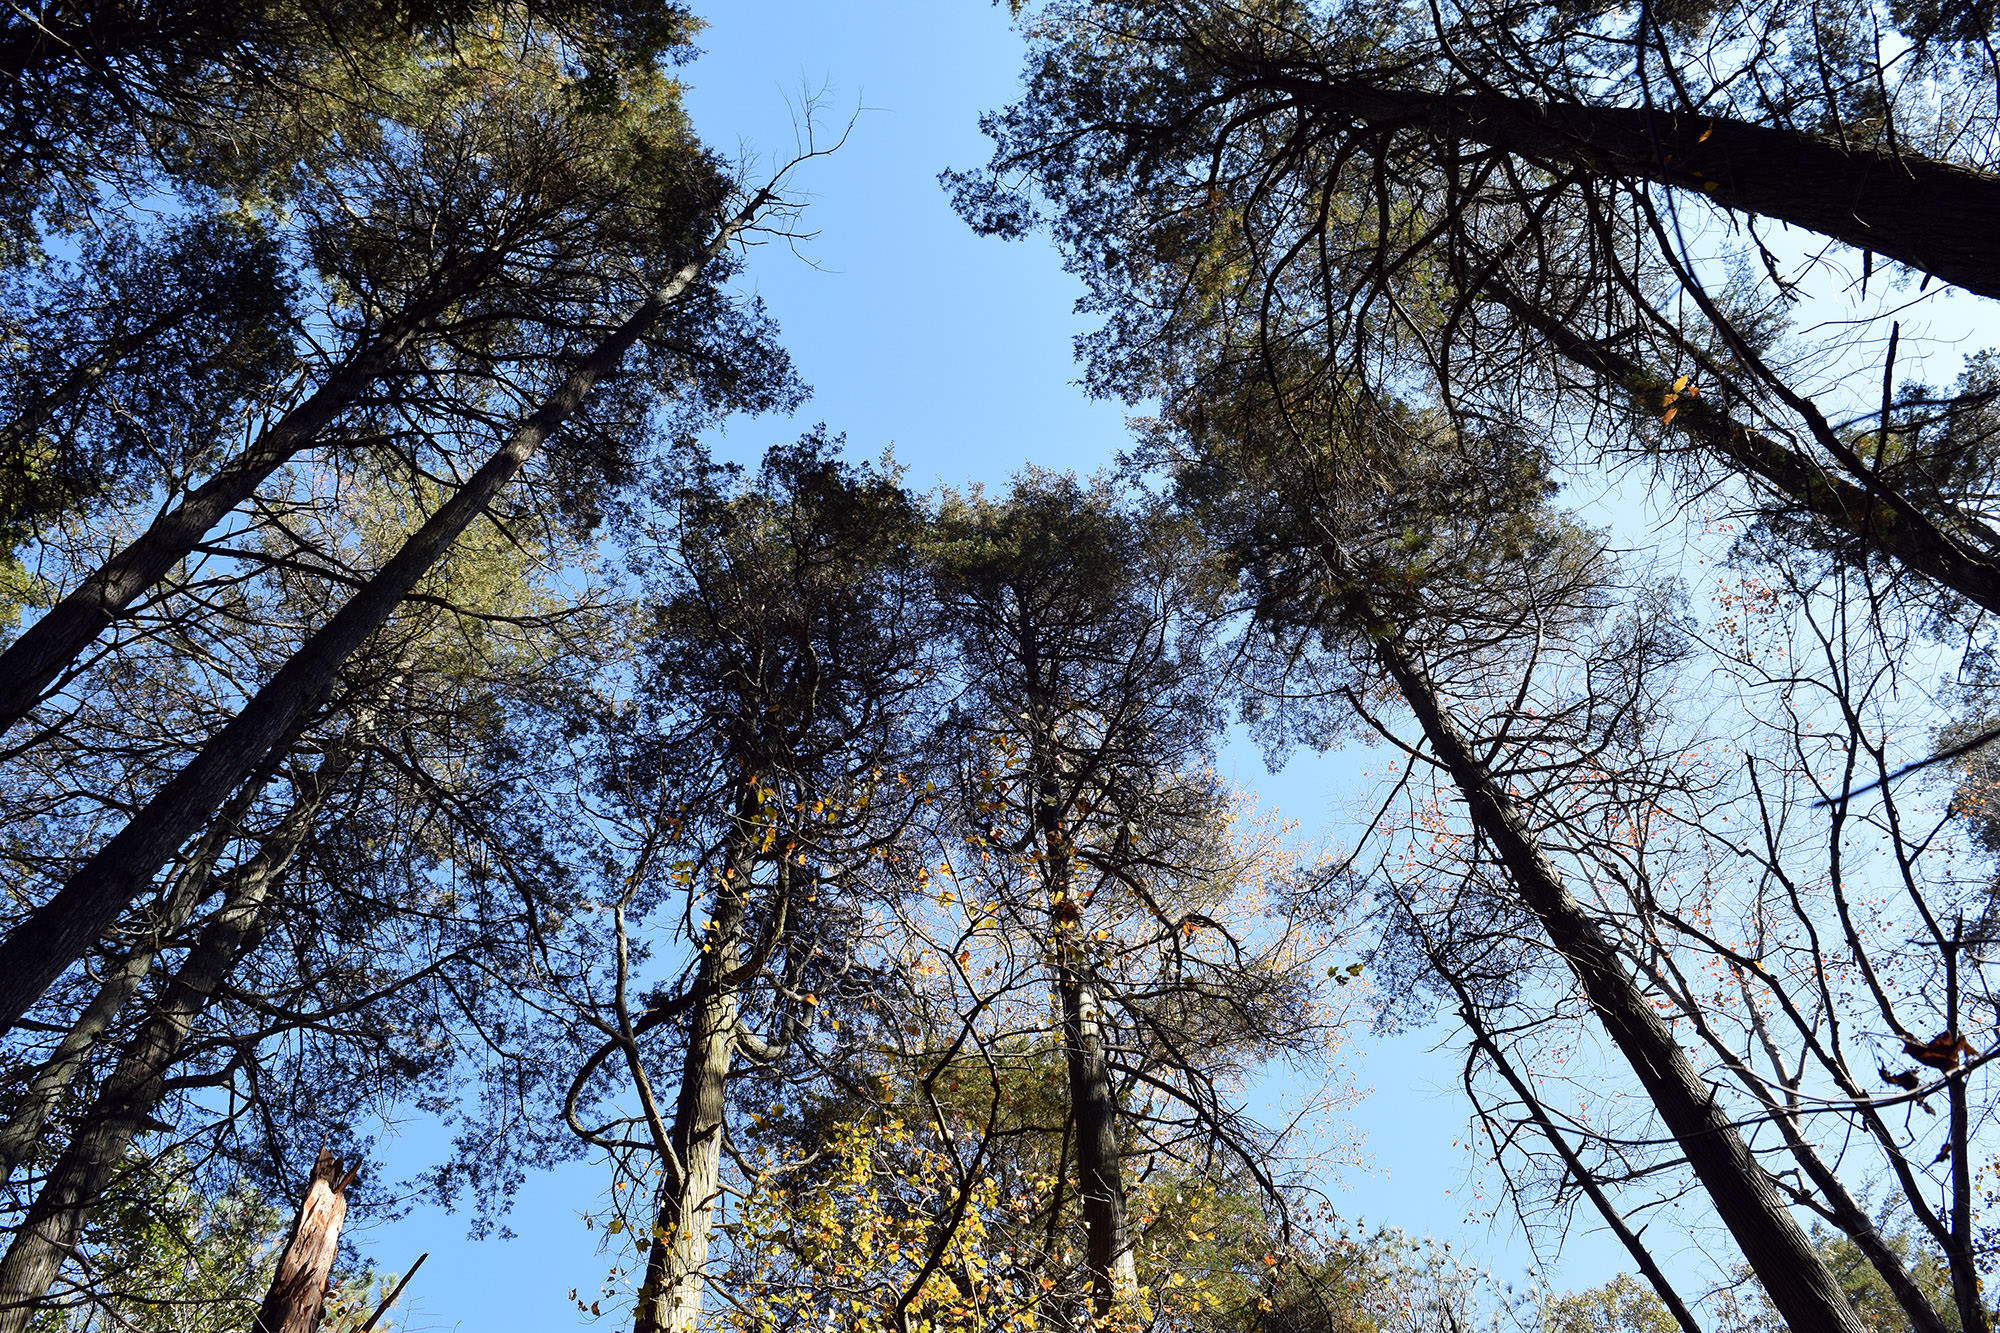 View looking up through the canopy of tall trees.